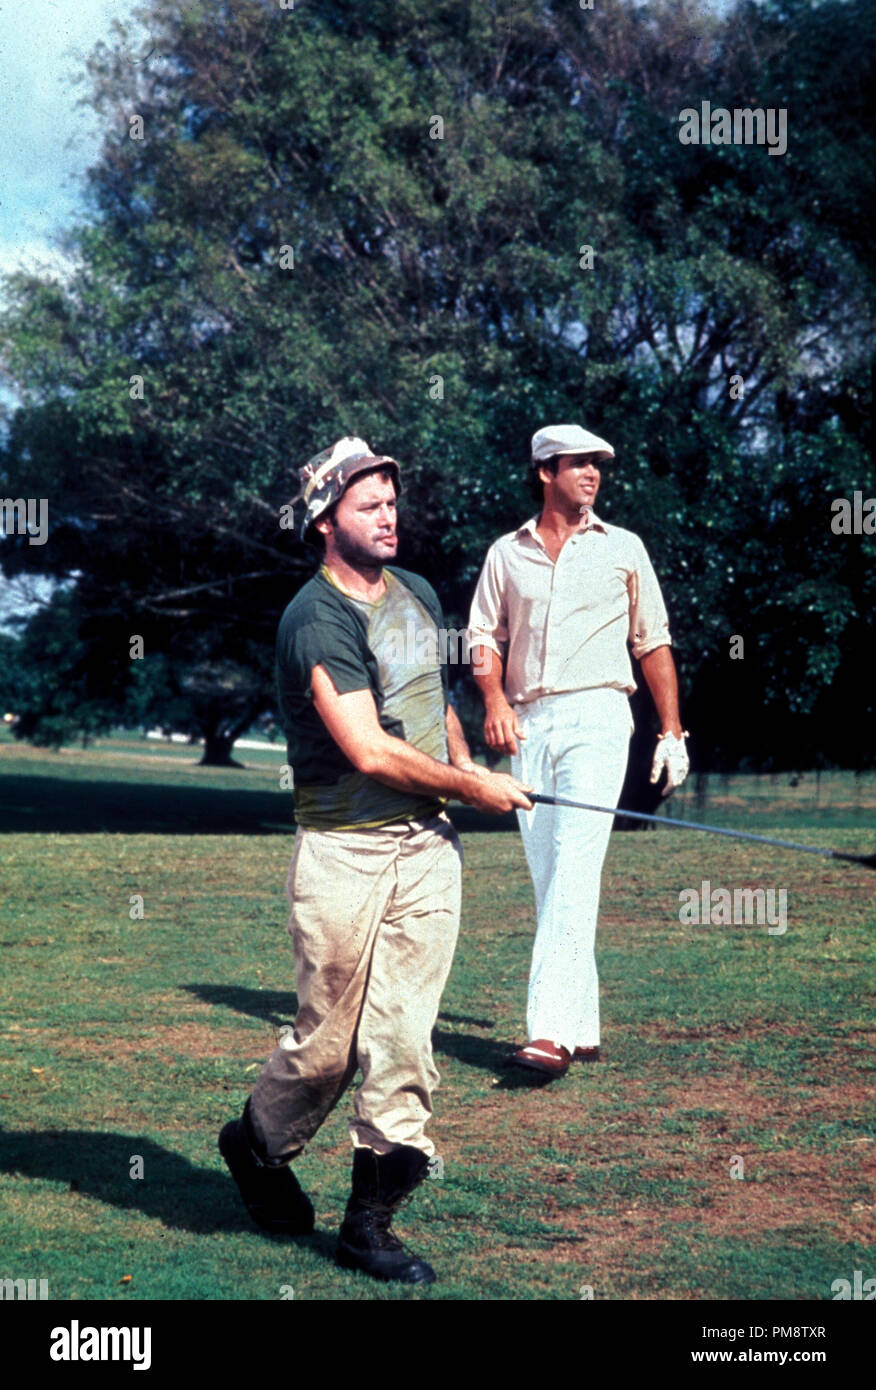 Studio Publicity Still from "Caddyshack" Bill Murray, Chevy Chase © 1980 Orion  All Rights Reserved   File Reference # 31715296THA  For Editorial Use Only Stock Photo